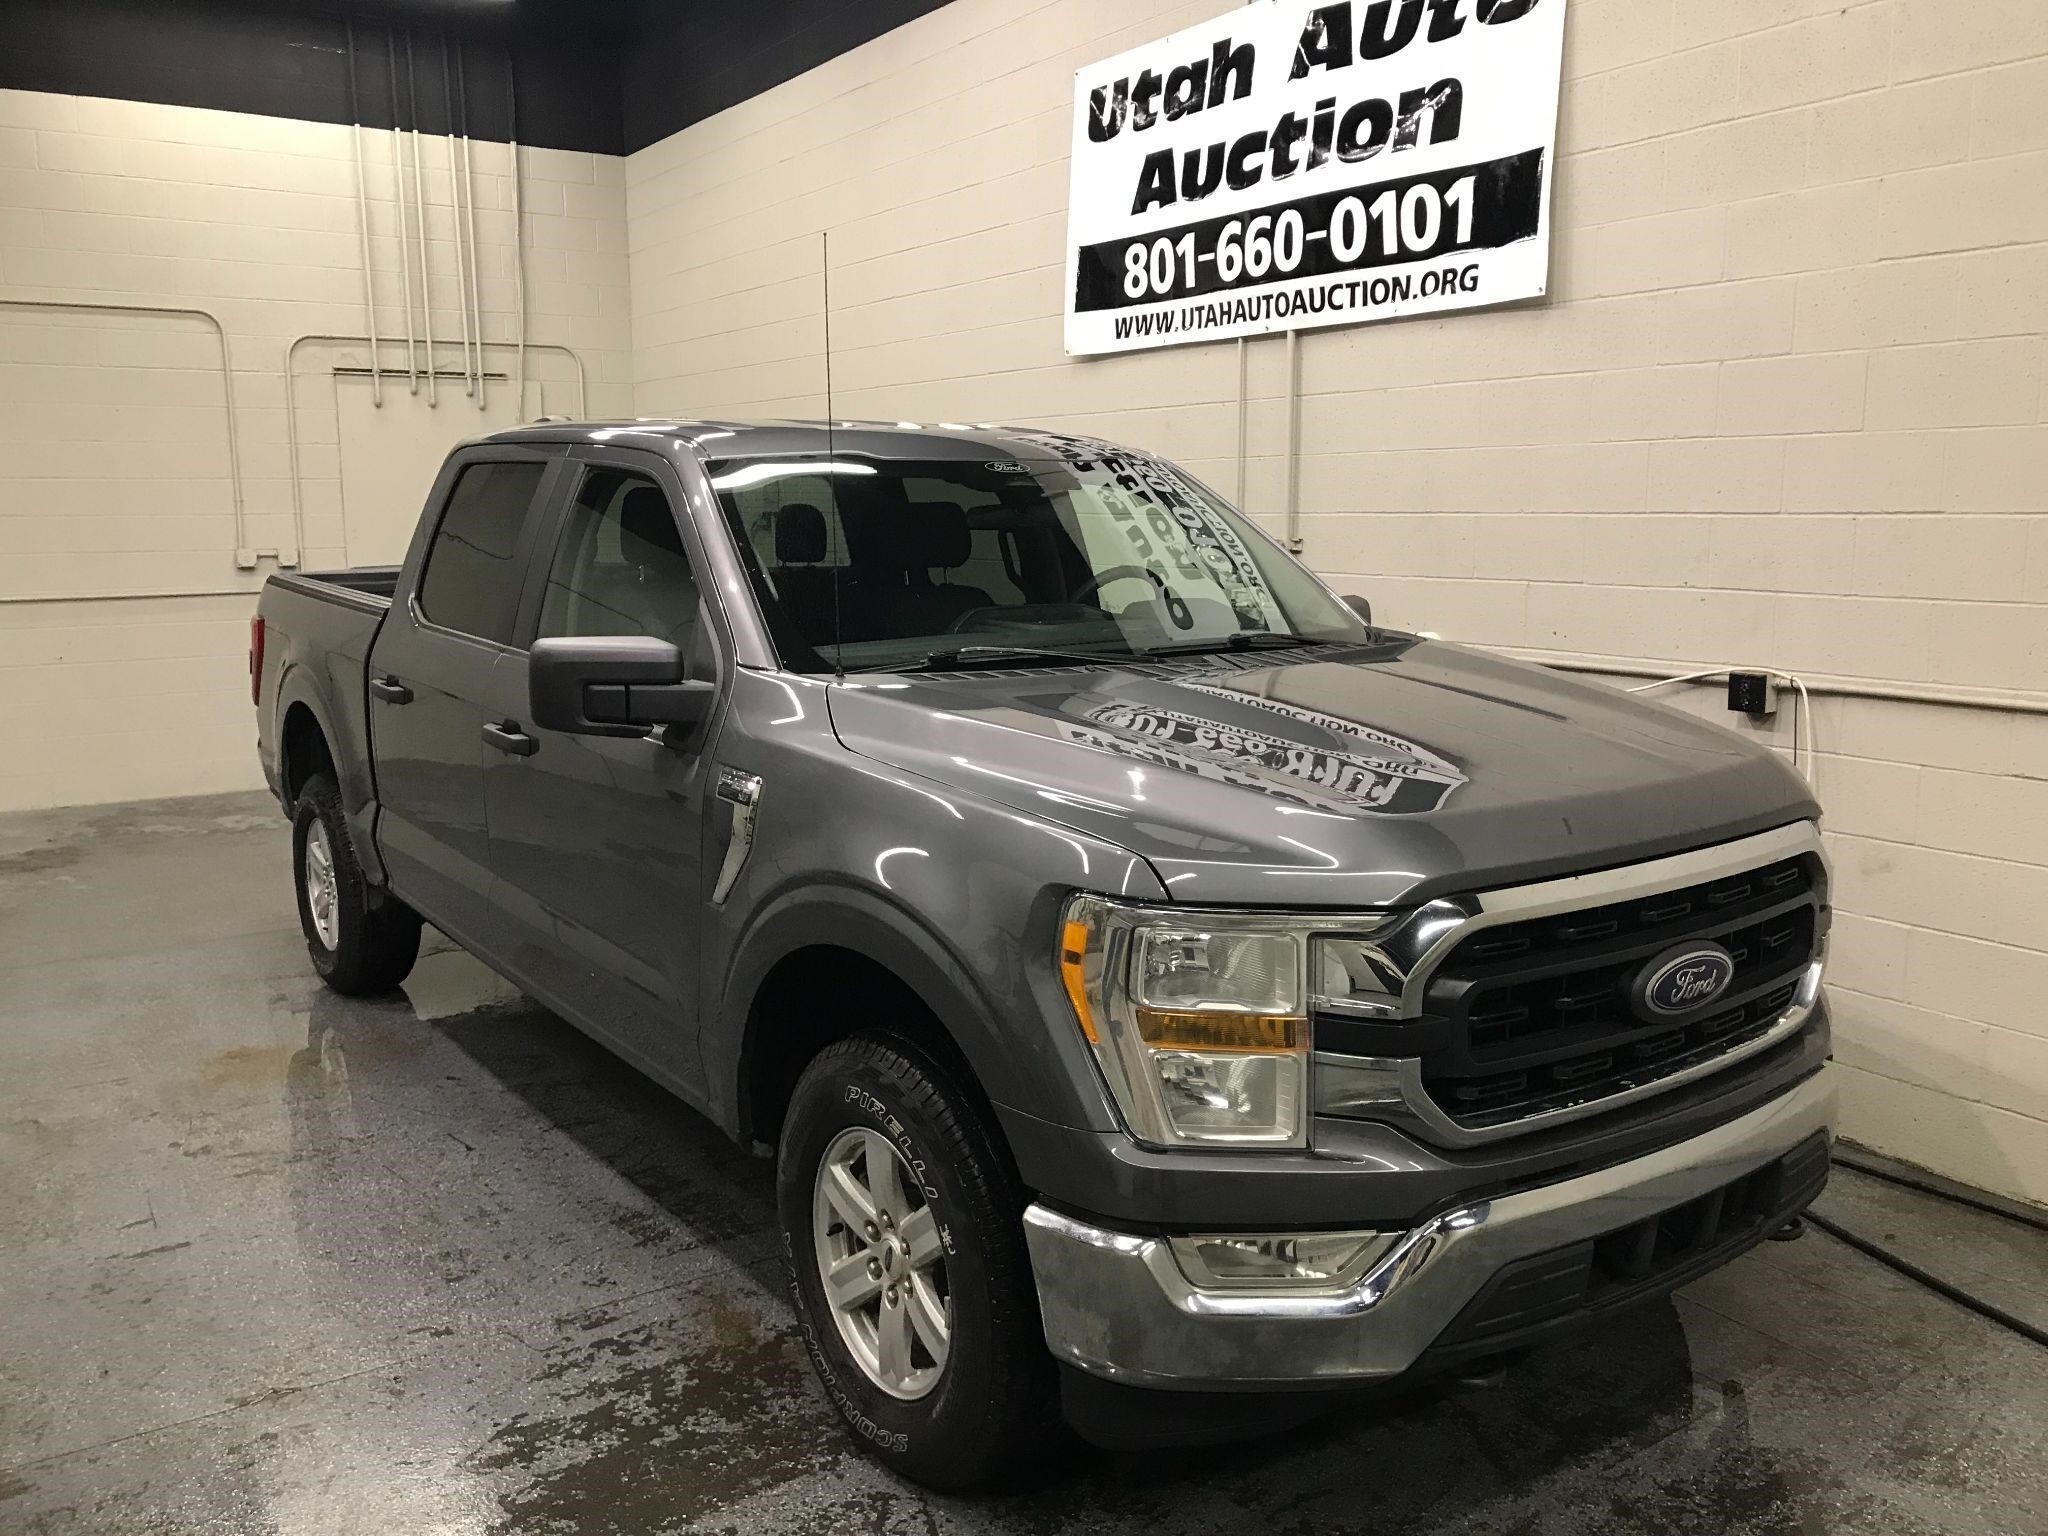 APRIL CONSIGNMENT AND FLEET AUCTION